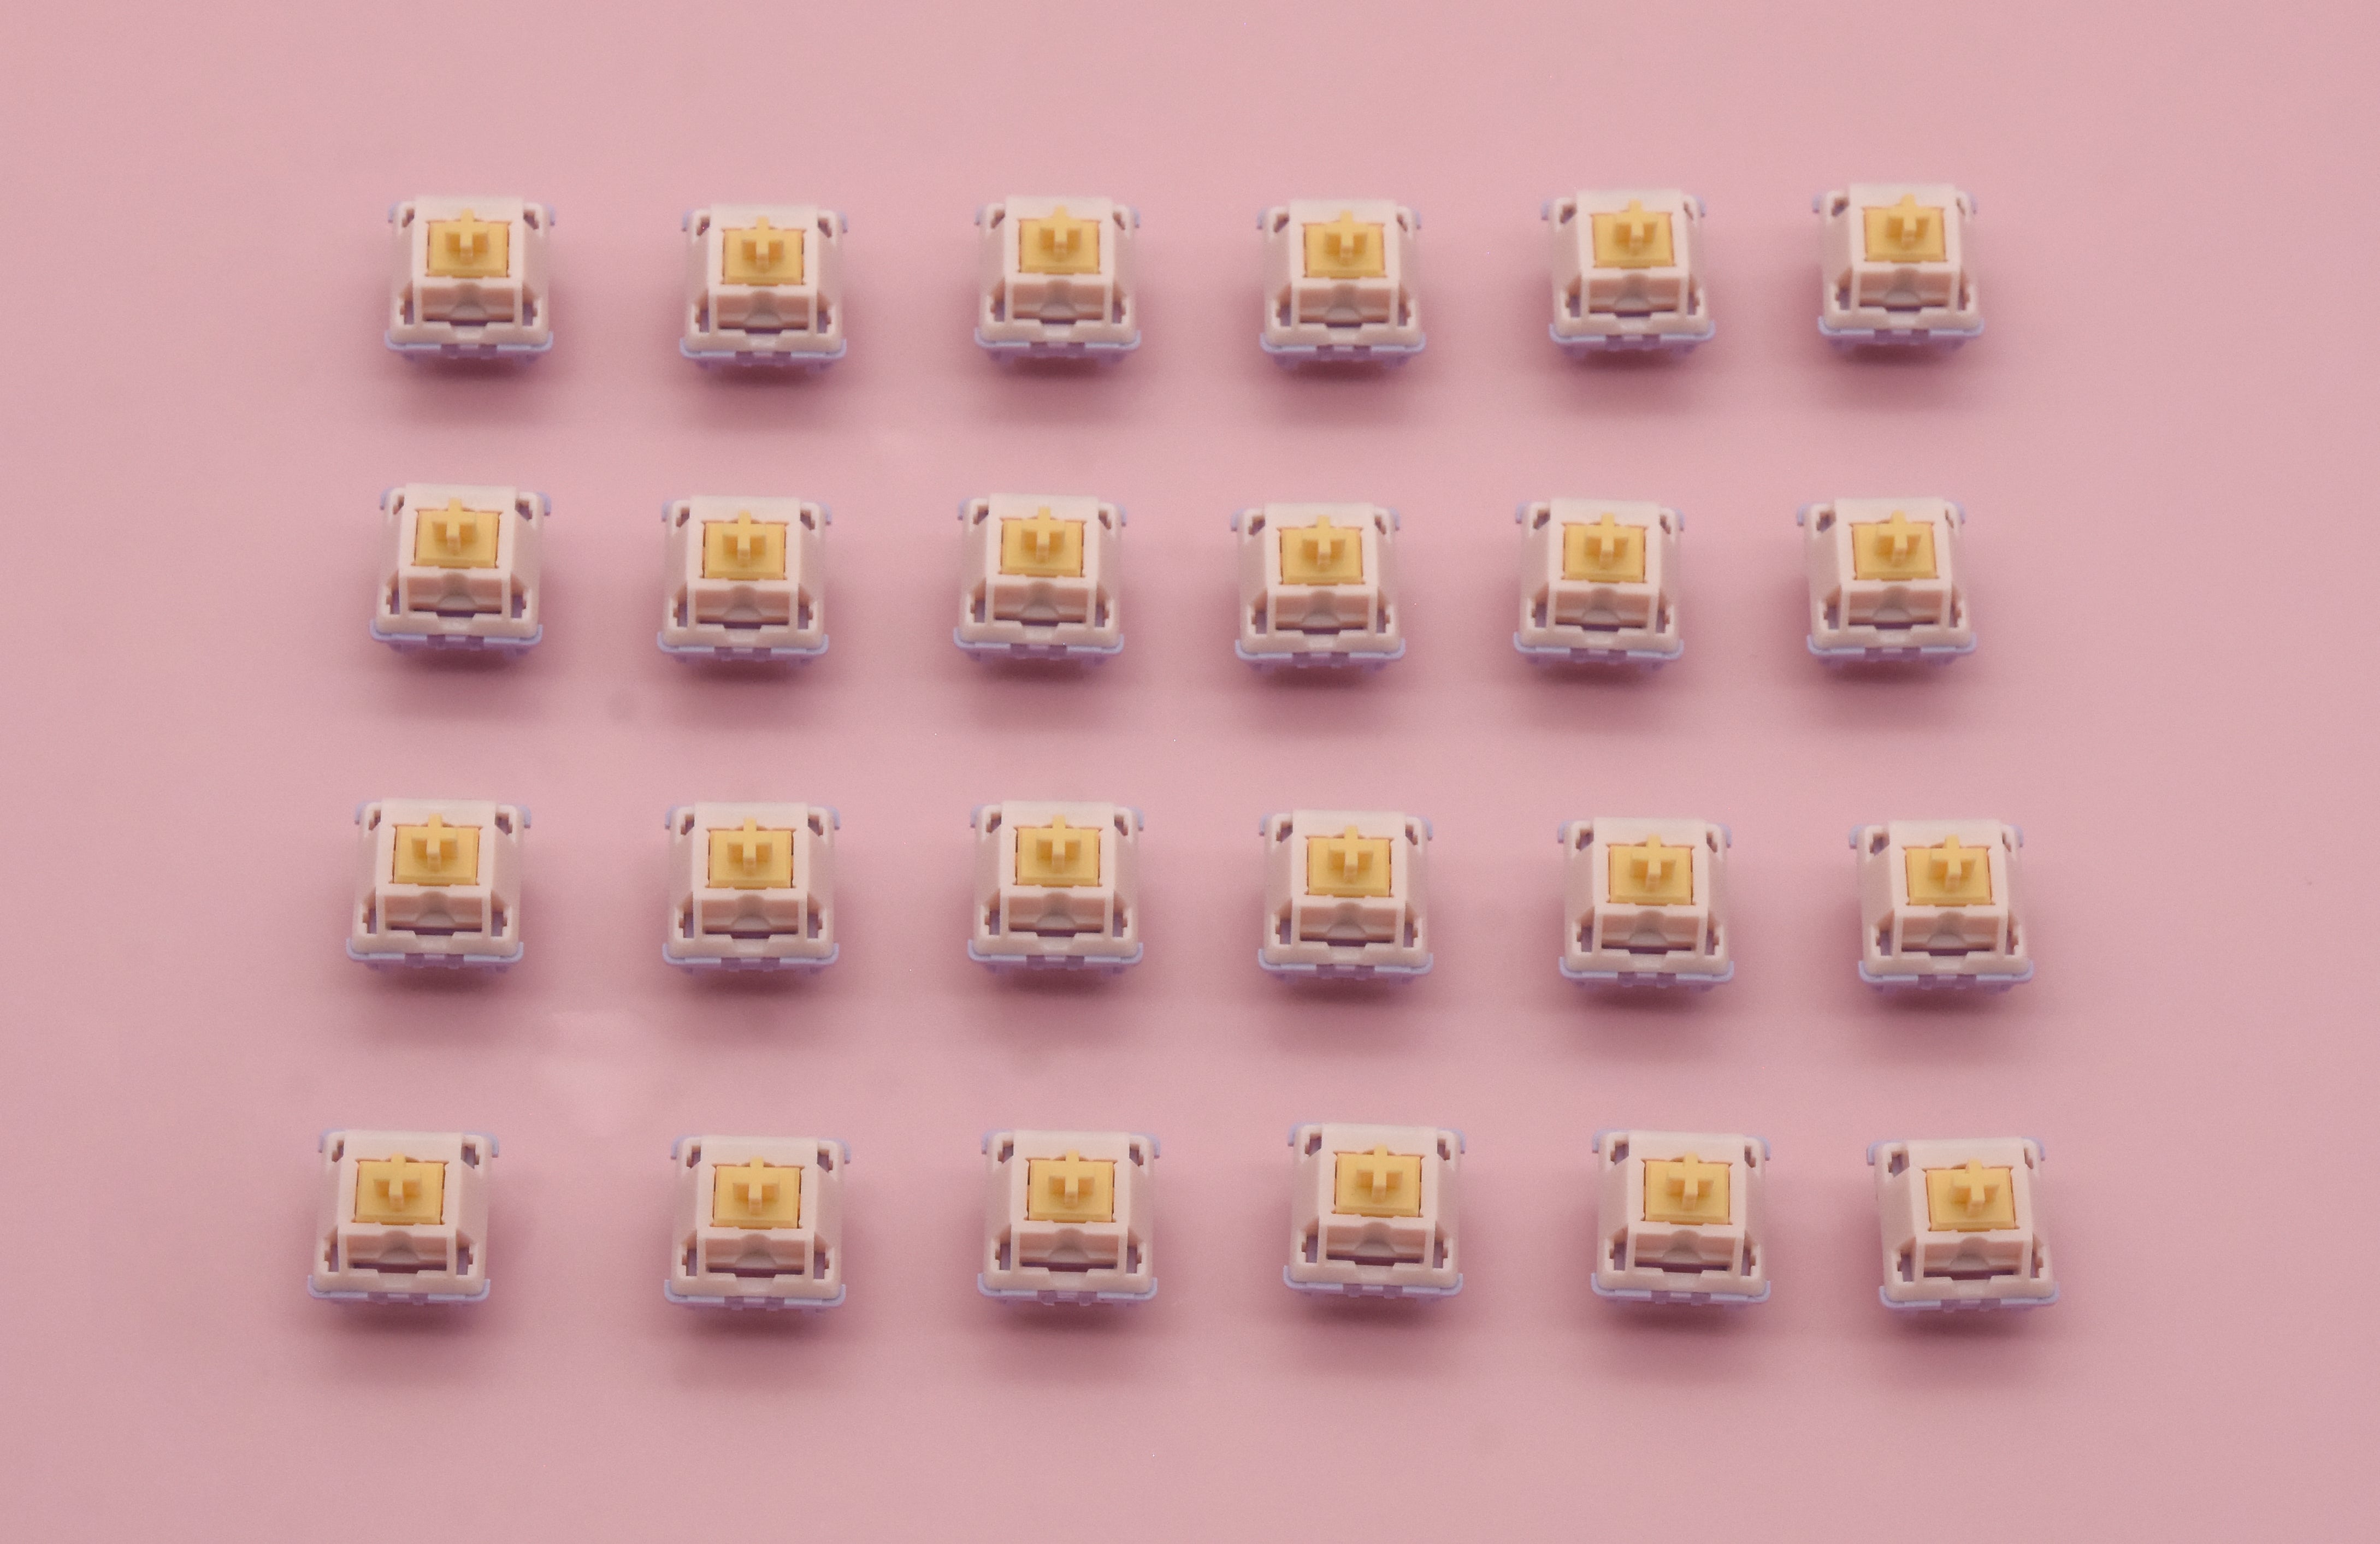 MMD PRINCESS TACTILE SWITCH FACTORY LUBED EDITION (10PCS)